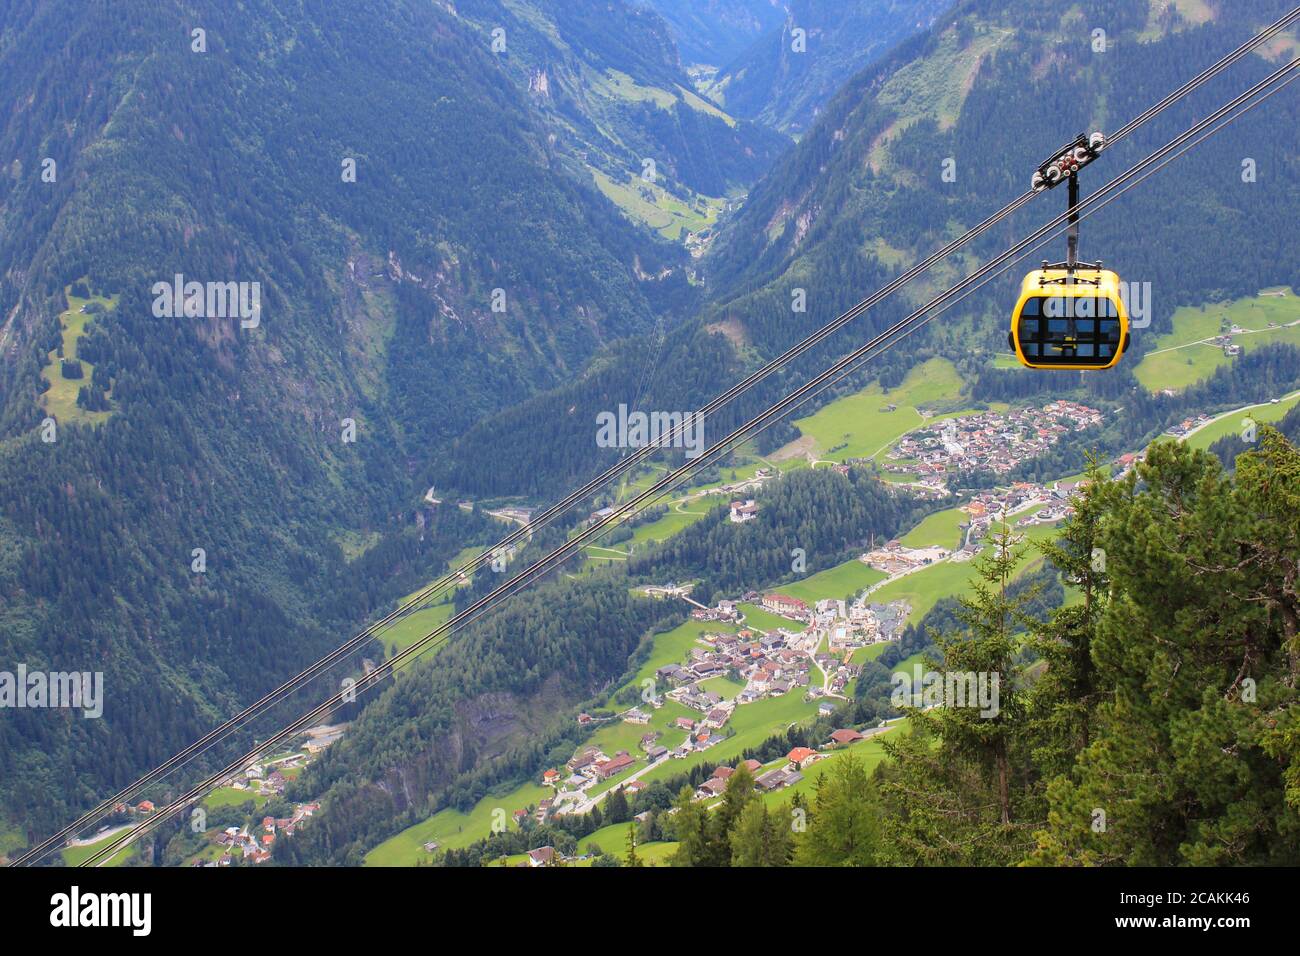 Yellow gondola cable car going down over an alpine Austrian town Mayrhofen in a mountain valley Stock Photo